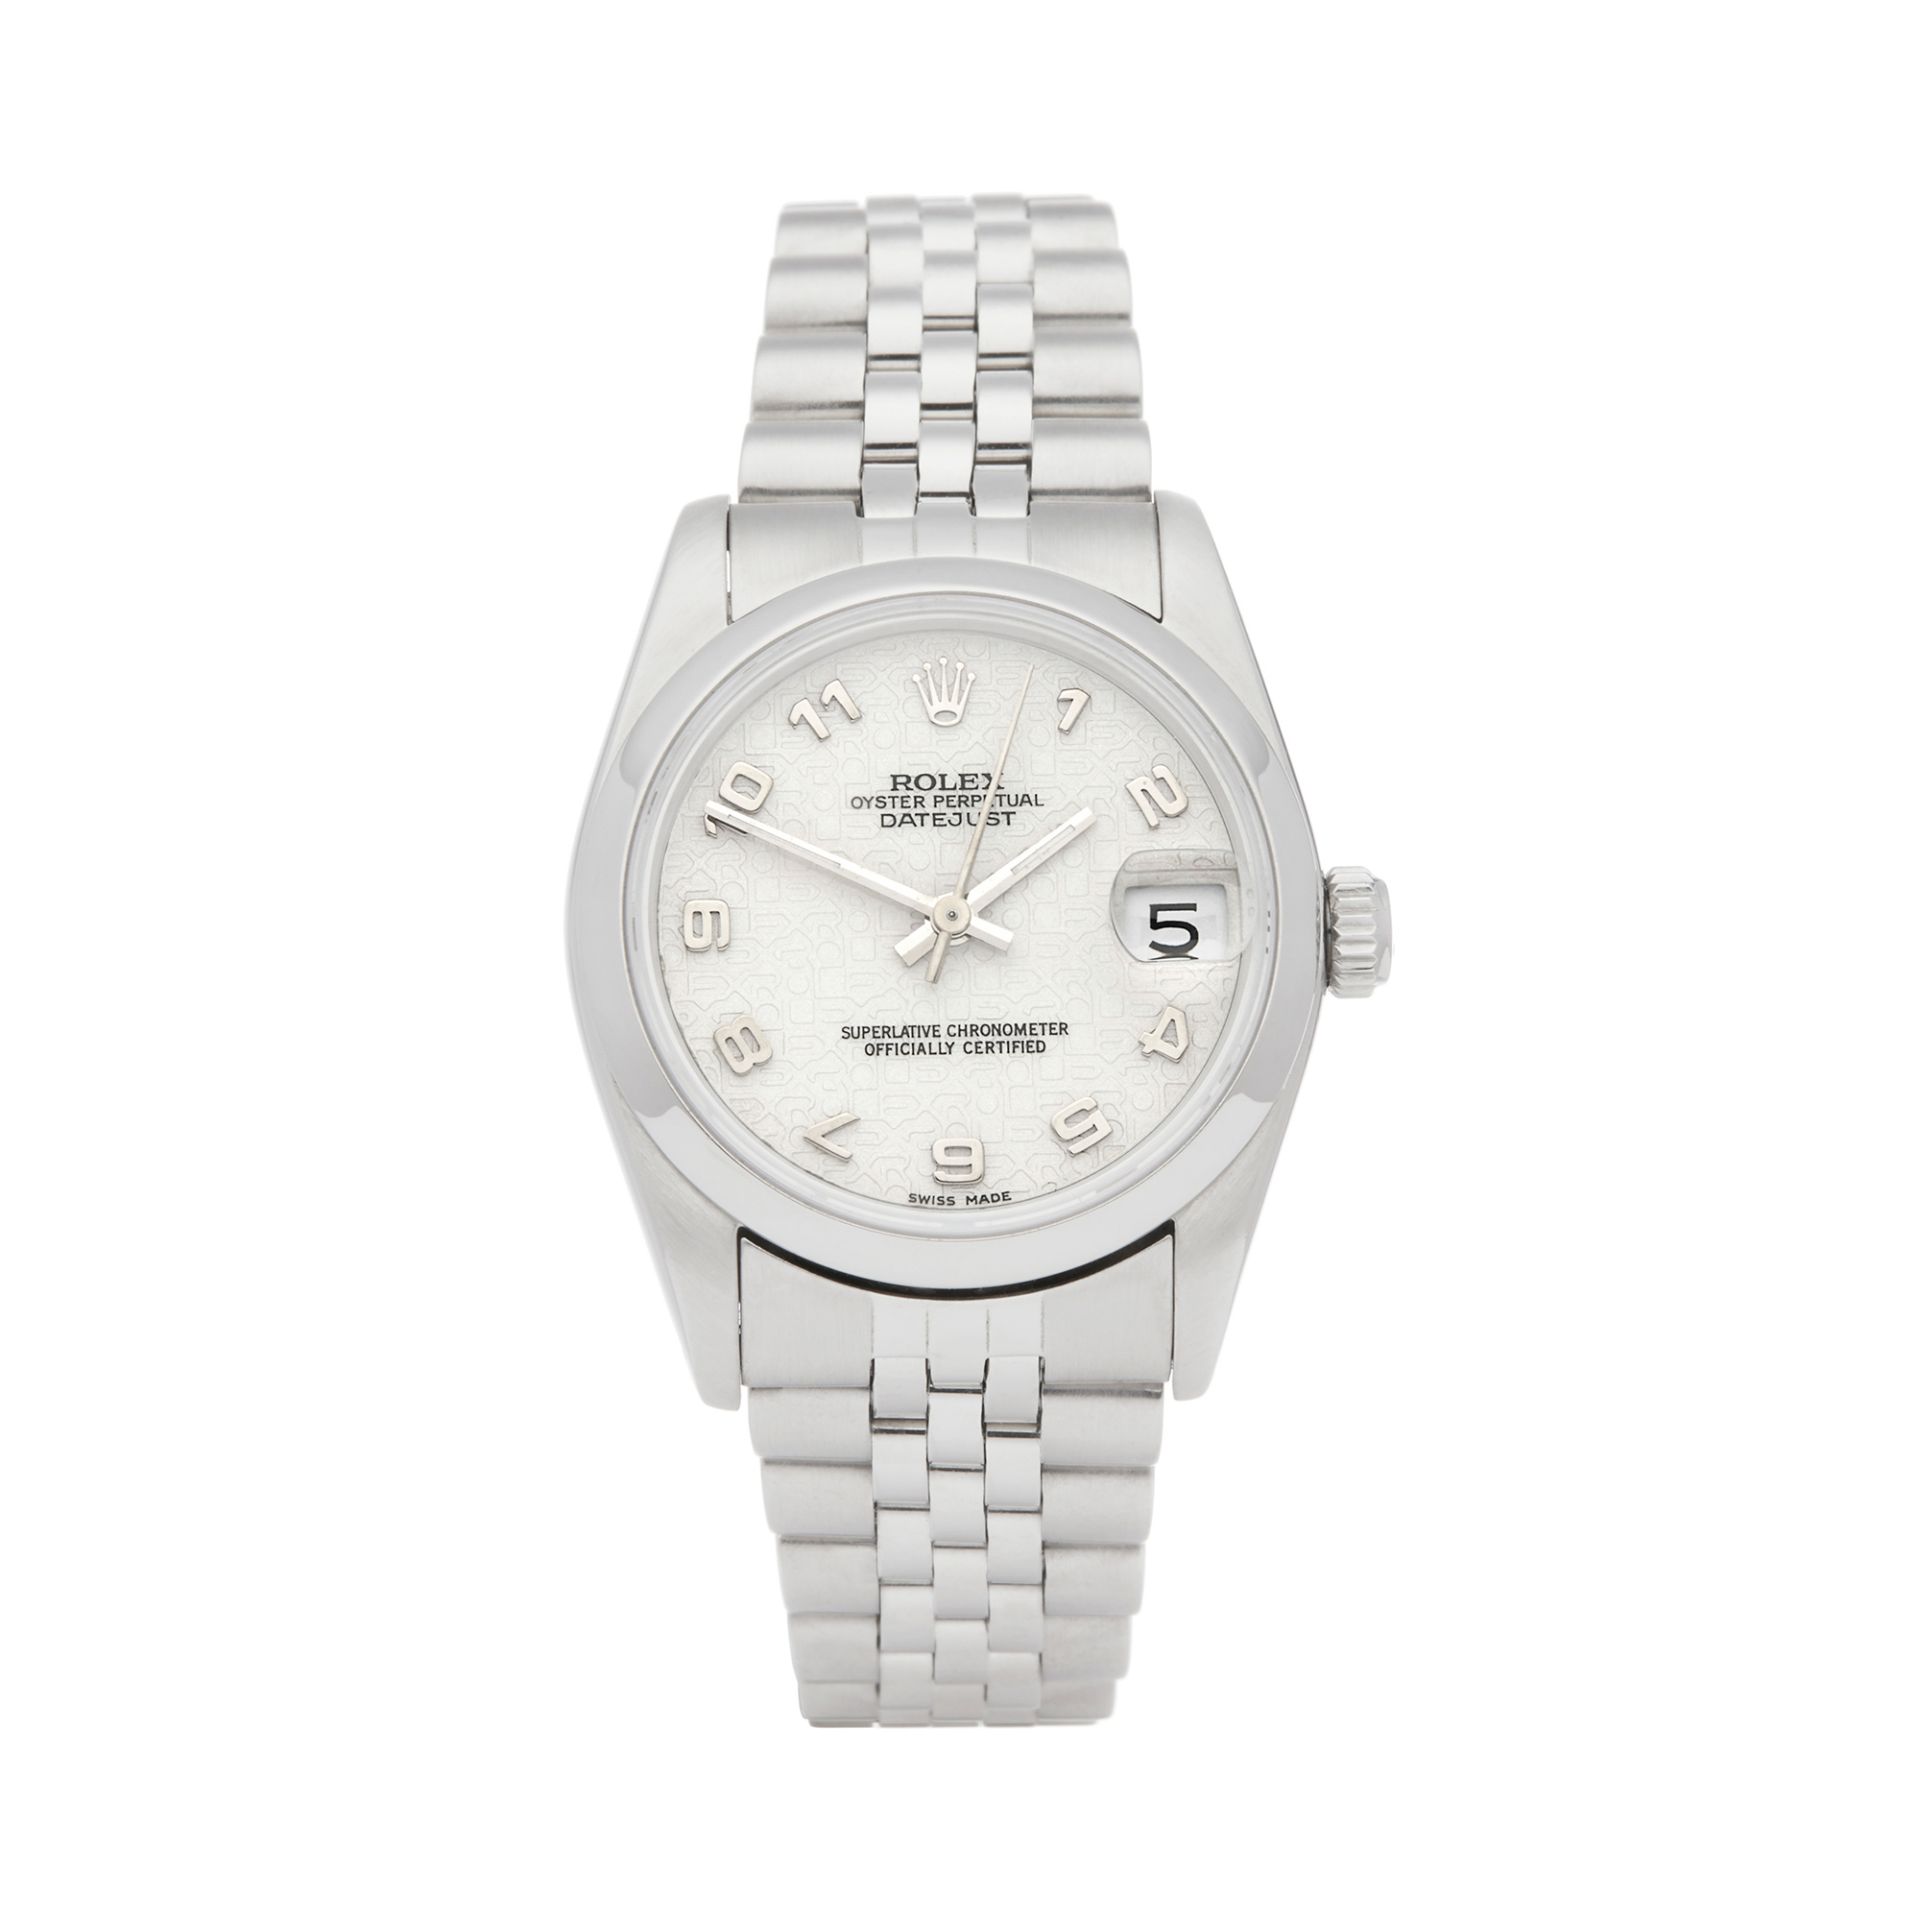 Rolex Datejust 31 68240 Ladies Stainless Steel Watch - Image 6 of 6